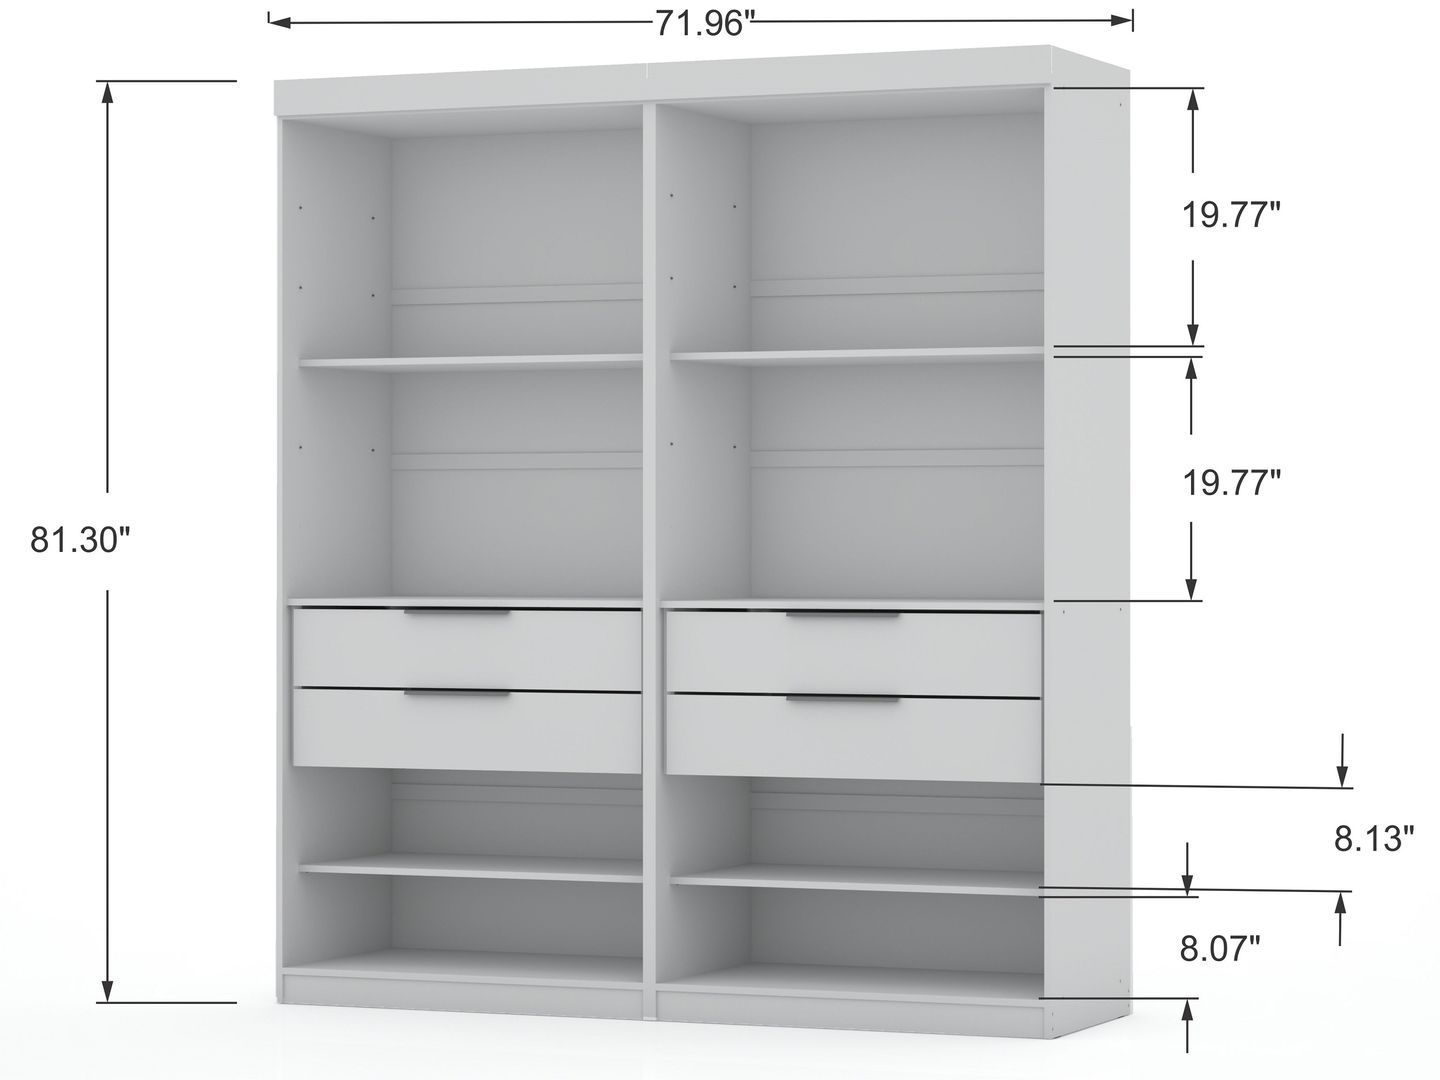 Manhattan Comfort Mulberry 2 Sectional Modern Wardrobe Closet with 4 Drawers - Set of 2 in White